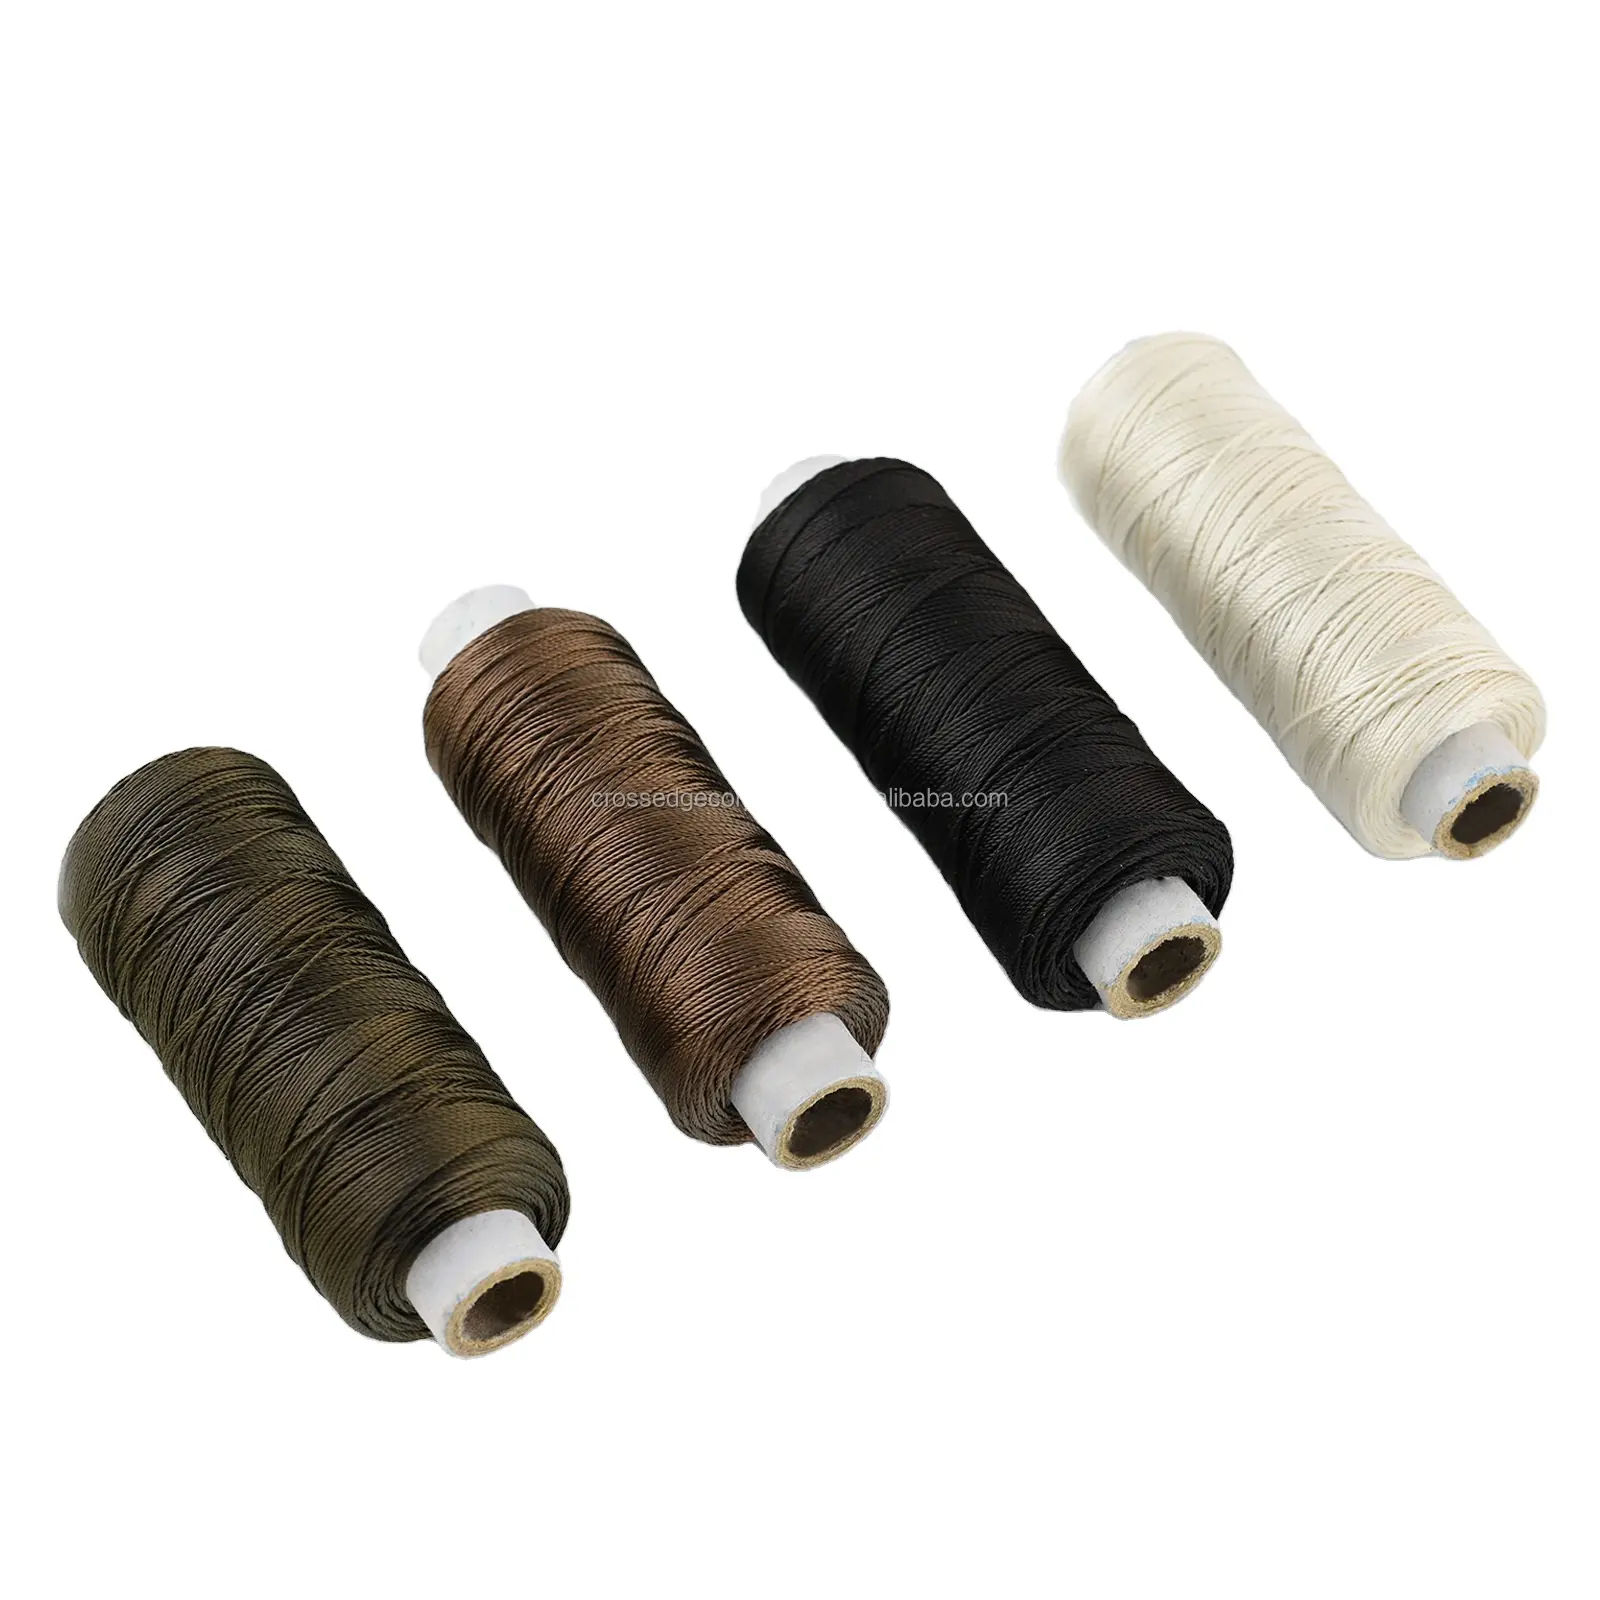 Professional Hair Extension Weaving Wig Sewing Thread High Quality flame retardant microfiber Polyester Nylon Bonded